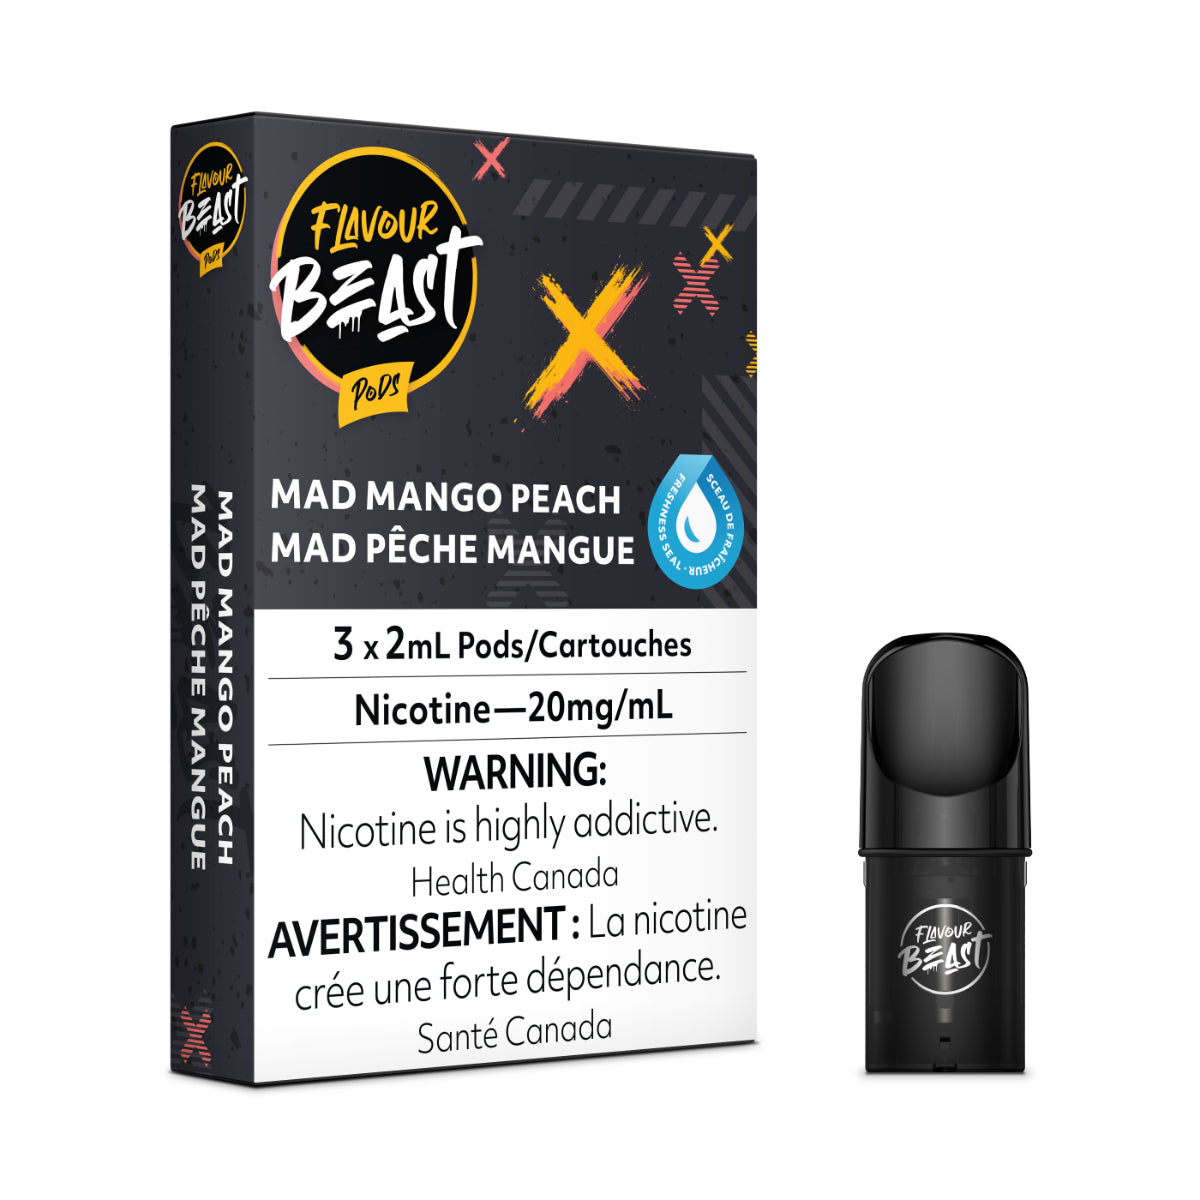 Mad Mango Peach - Flavour Beast Pod Pack - 20mg - EXCISED